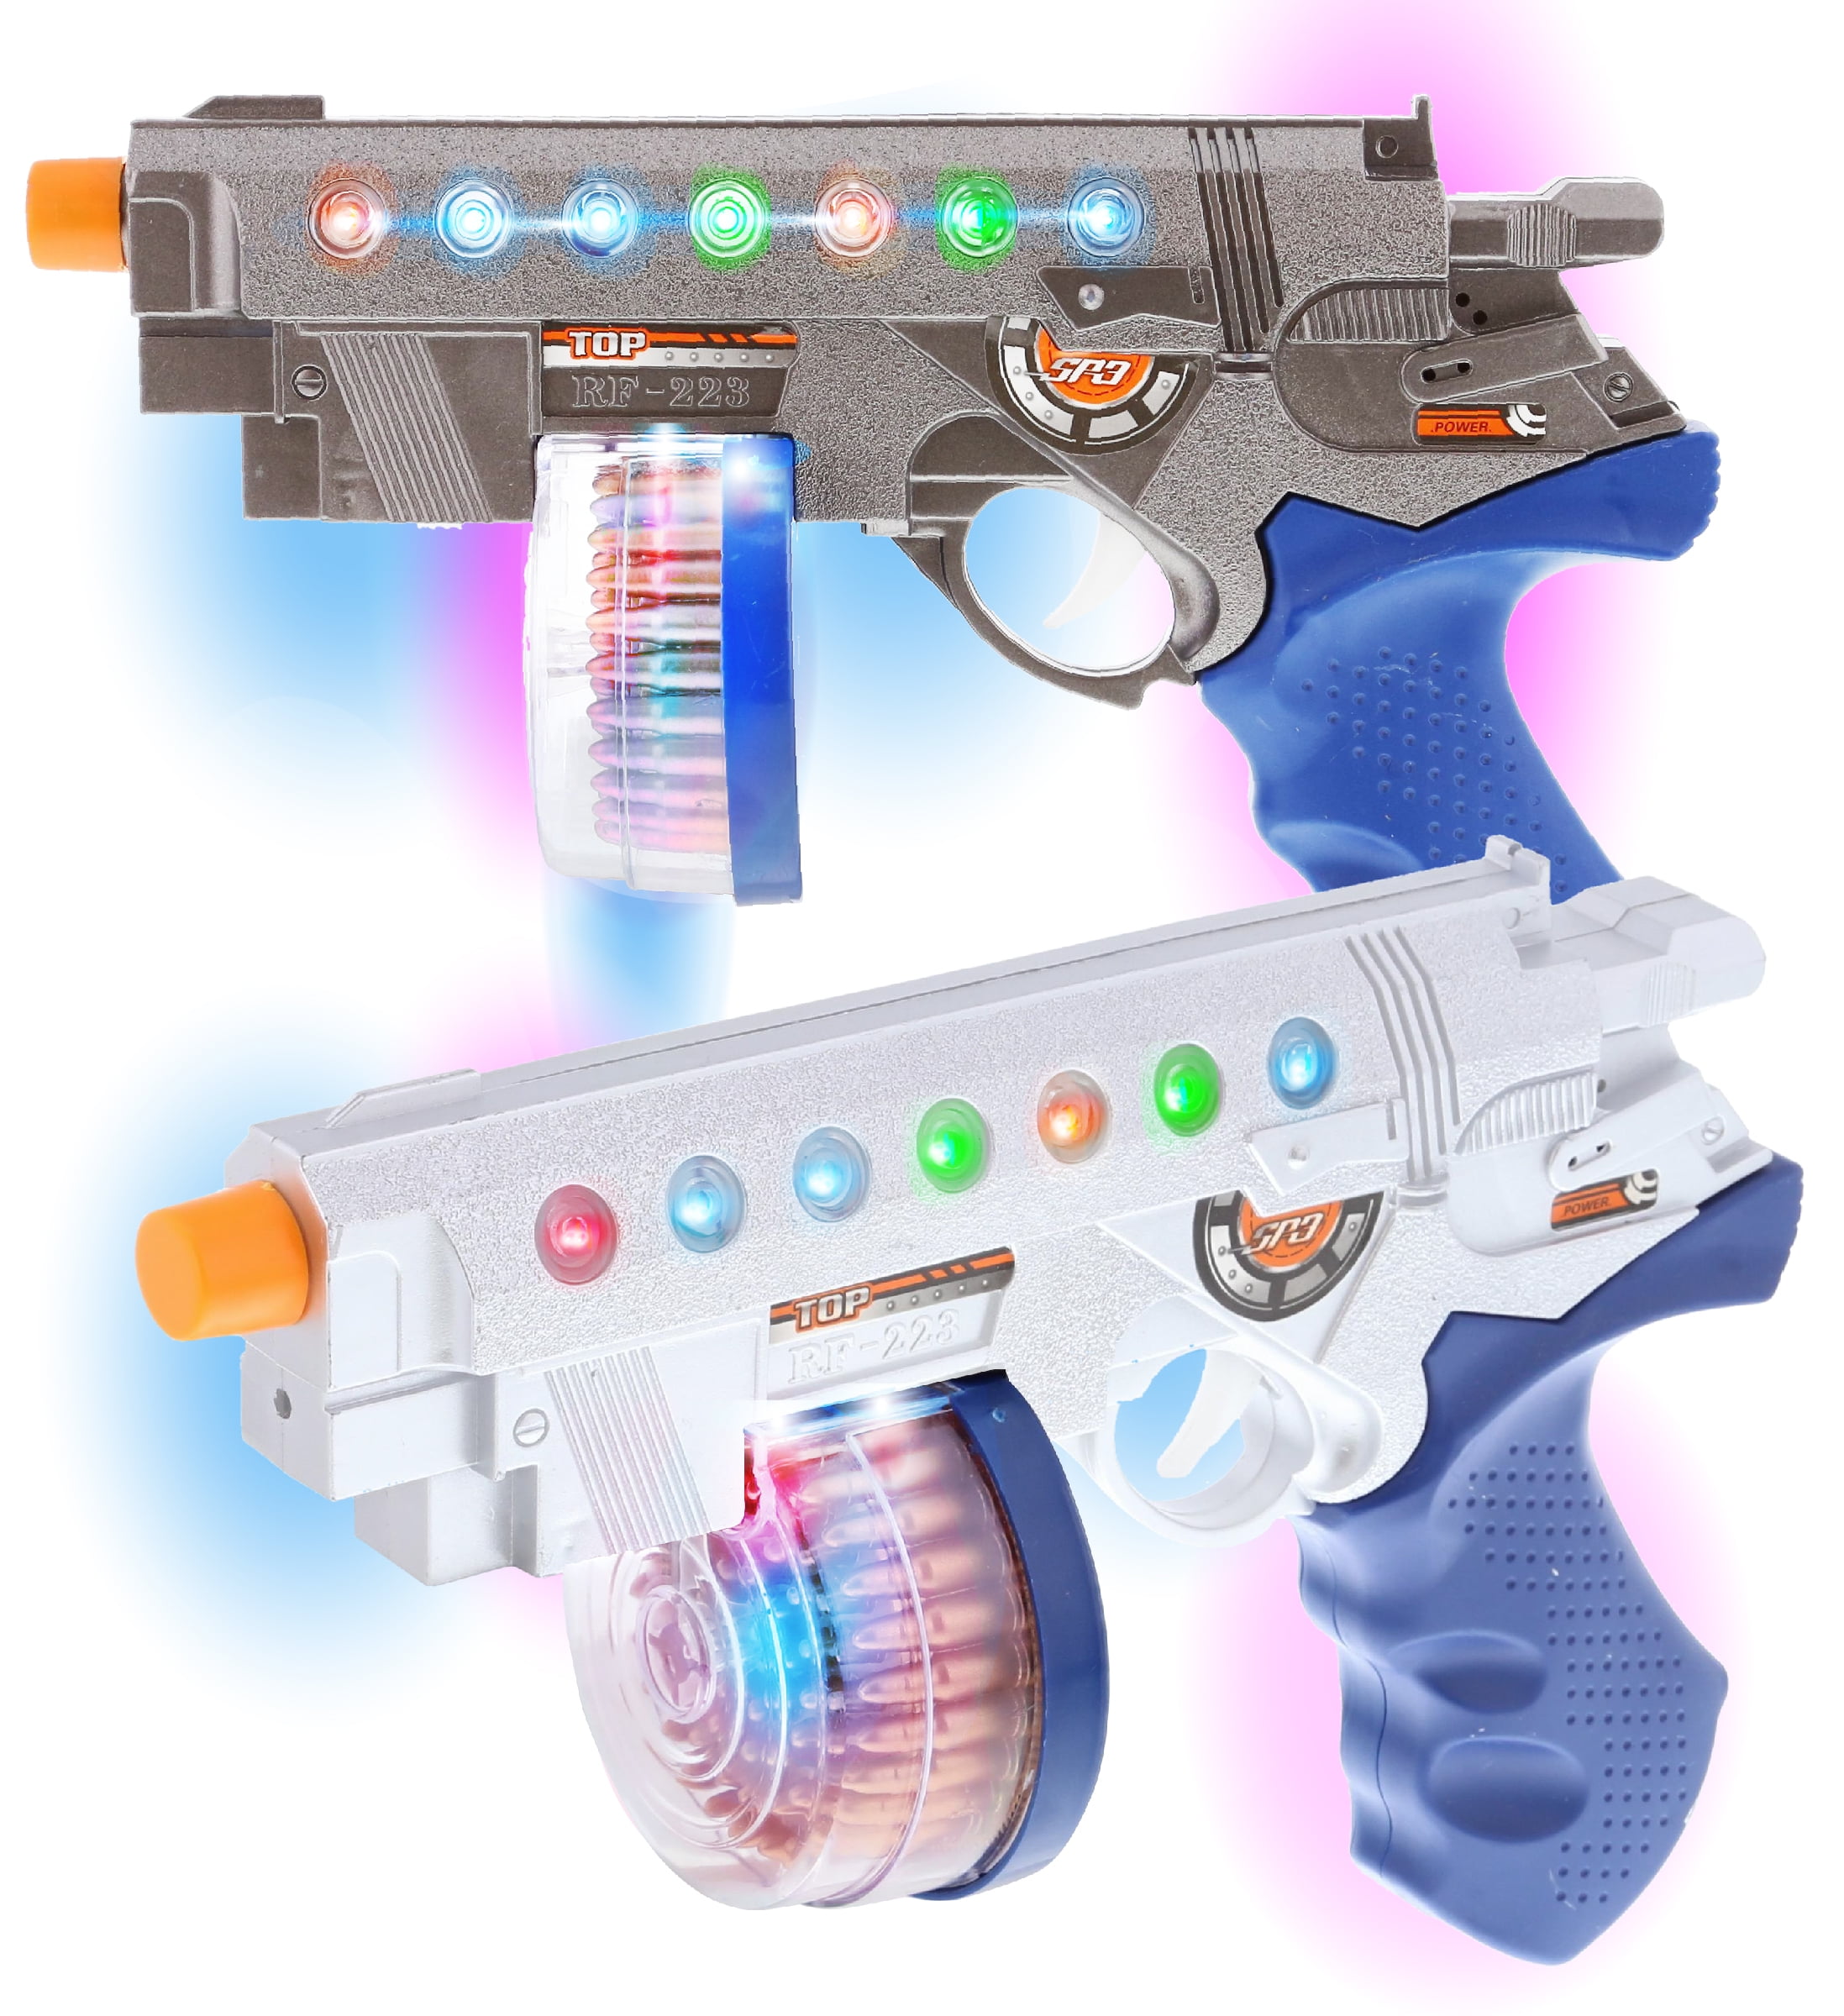 Pistol Toy hand Gun with Light and Sound Effects 